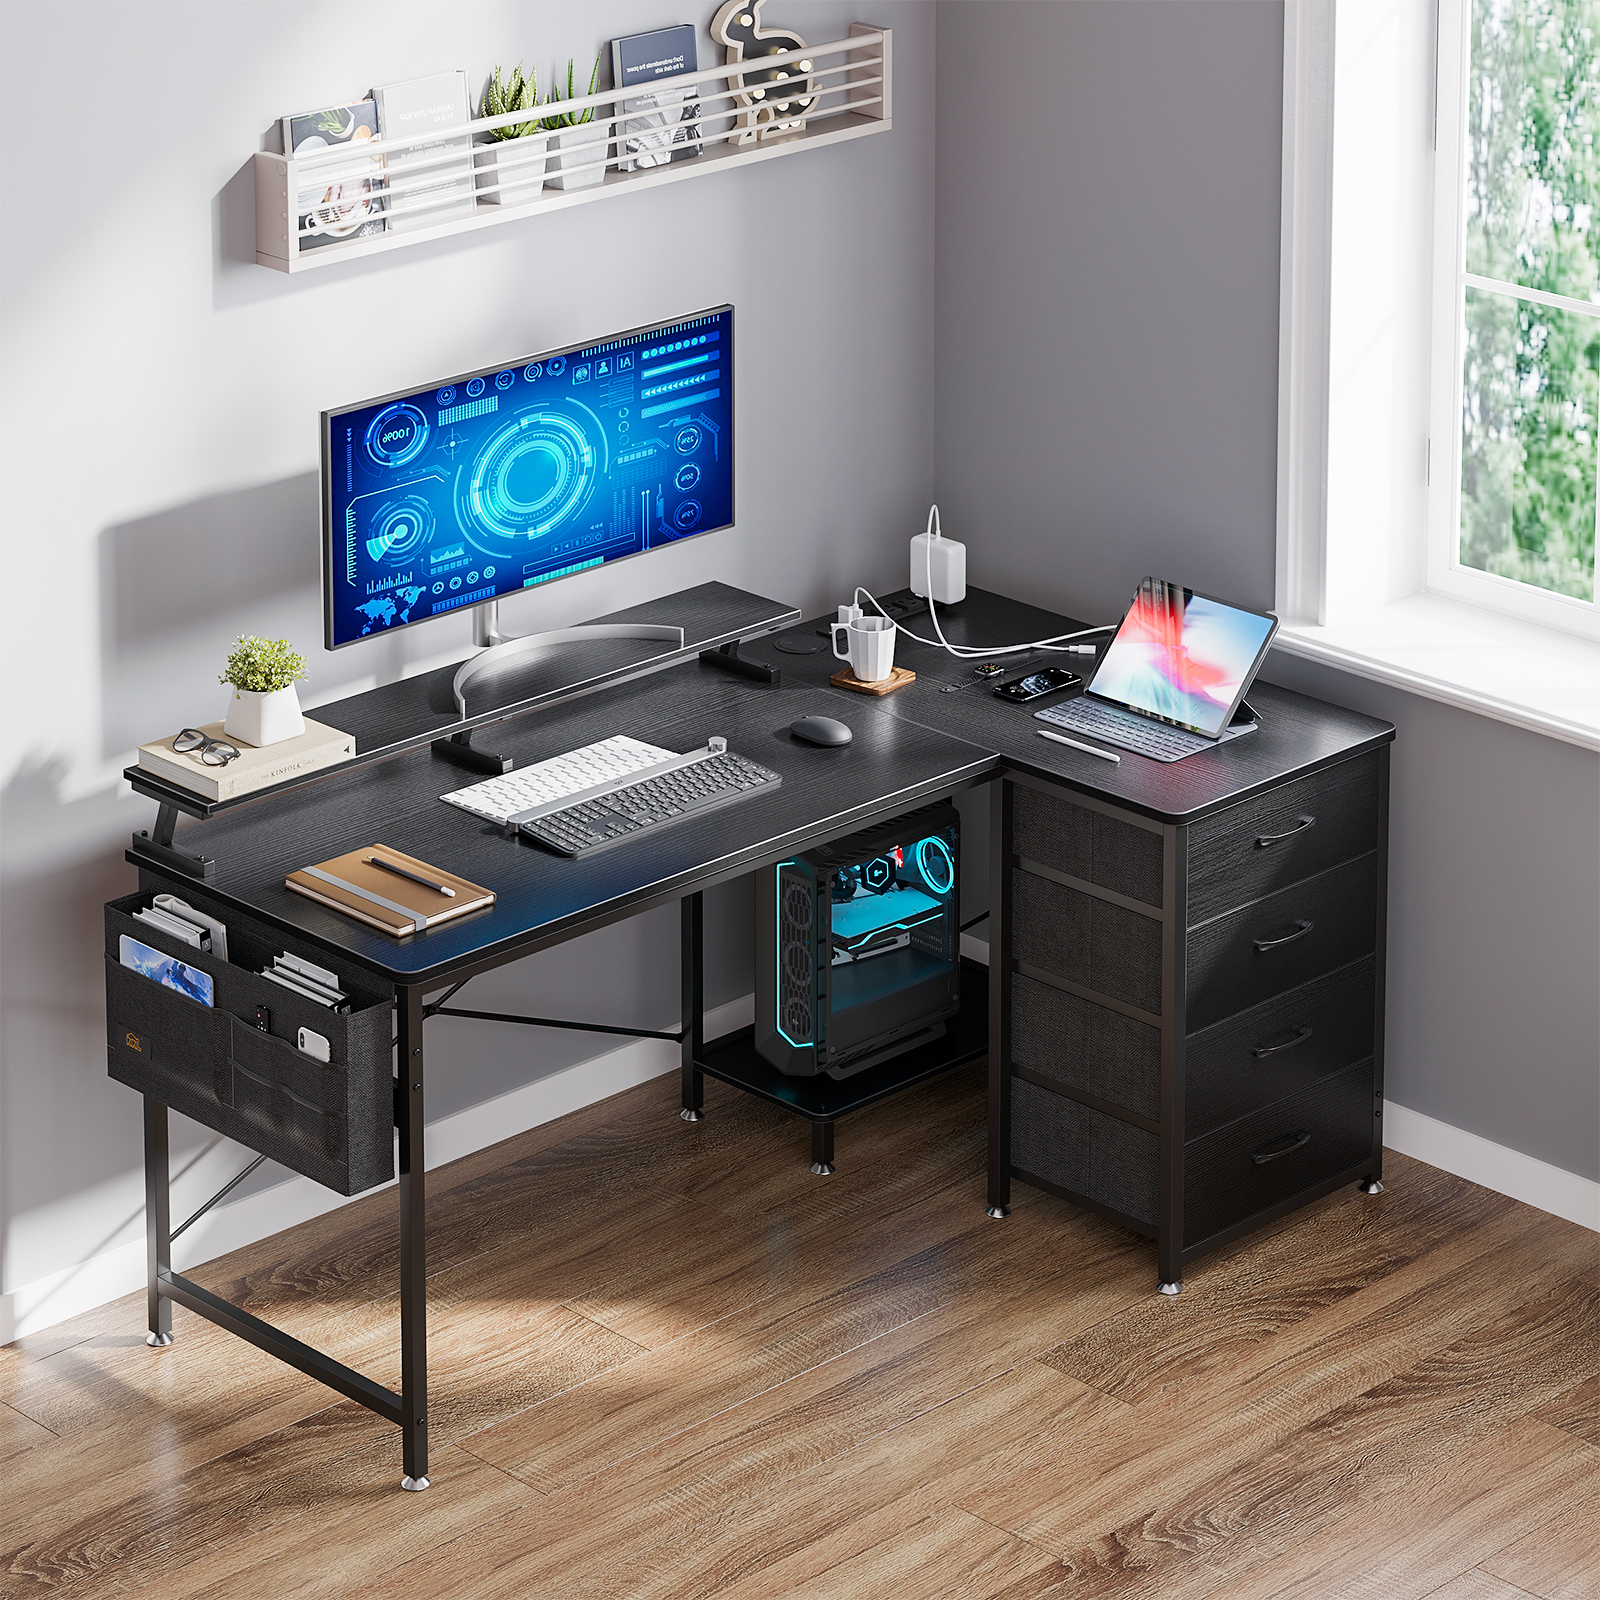 Shelf　Office,　with　Power　Home　Modern　Port,　for　Computer　55　Corner　Writing　Monitor　with　Drawer　4-Tier　Desk,　Desk　Desk　Gaming　Black　USB　Outlet　inch　Shaped　L　Charging